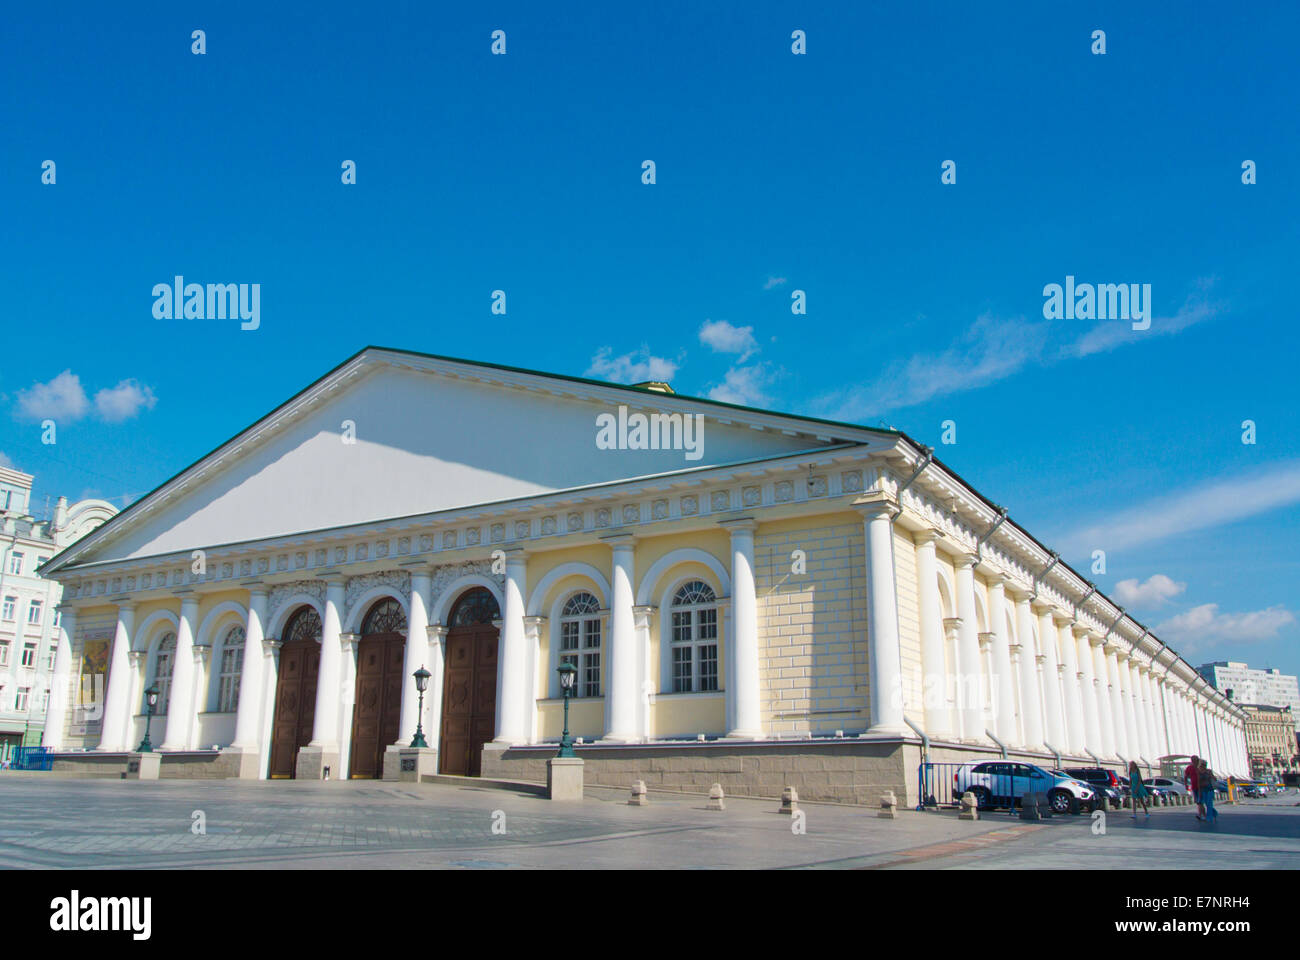 Manezh, Mosca Manege, exhibition hall Manezh Square, Central Moscow, Russia, Europa Foto Stock